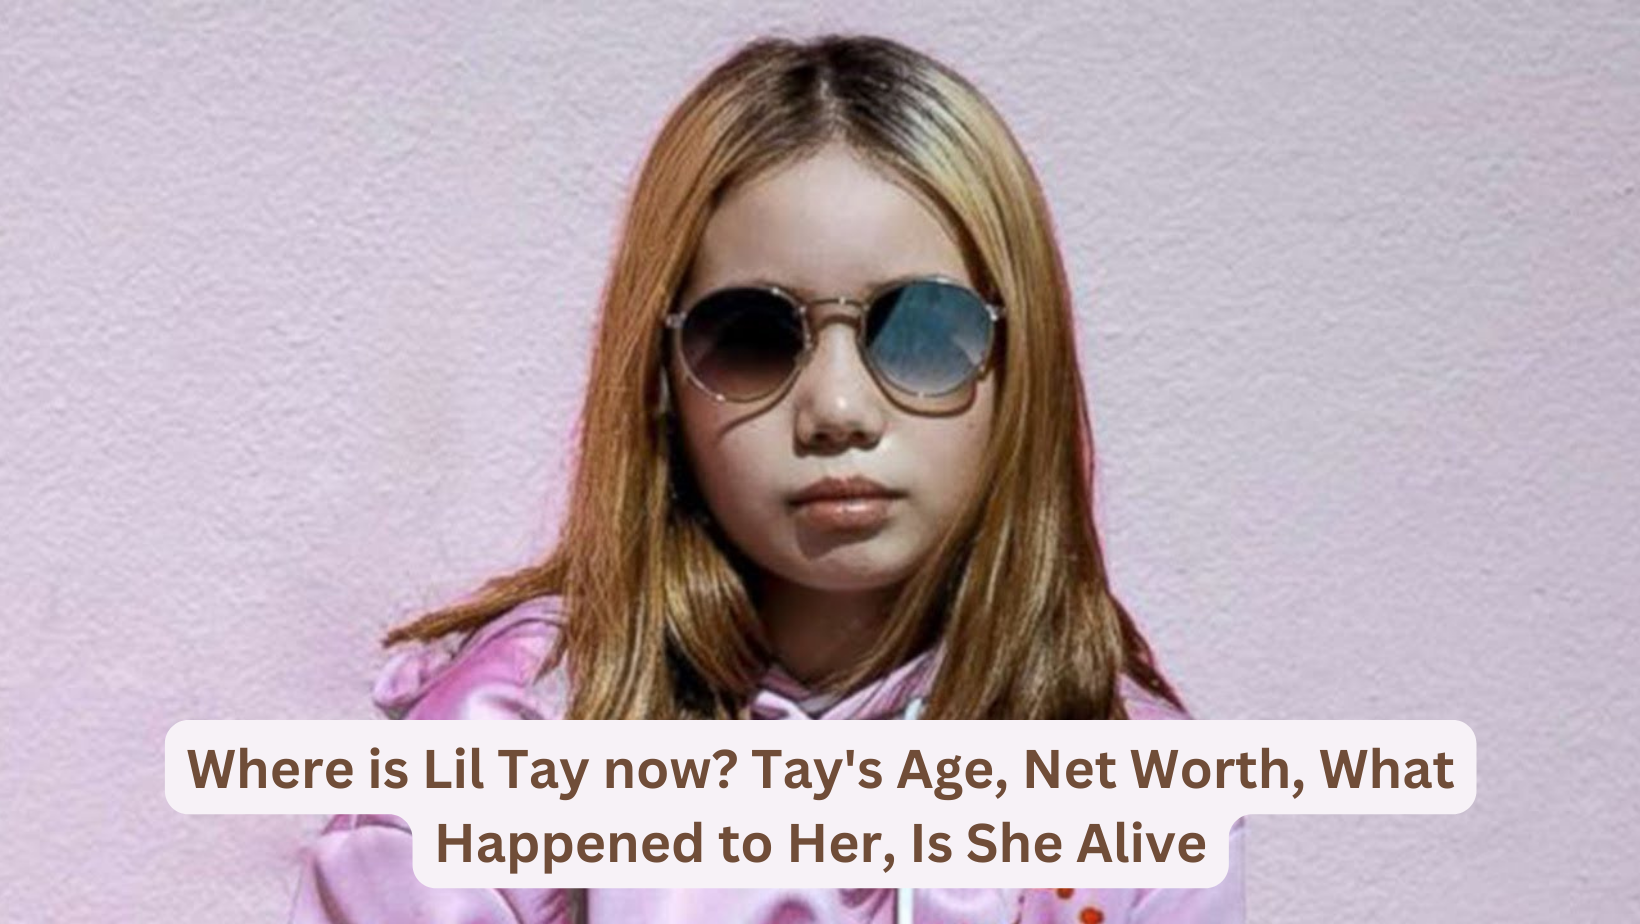 Details about Lil Tay